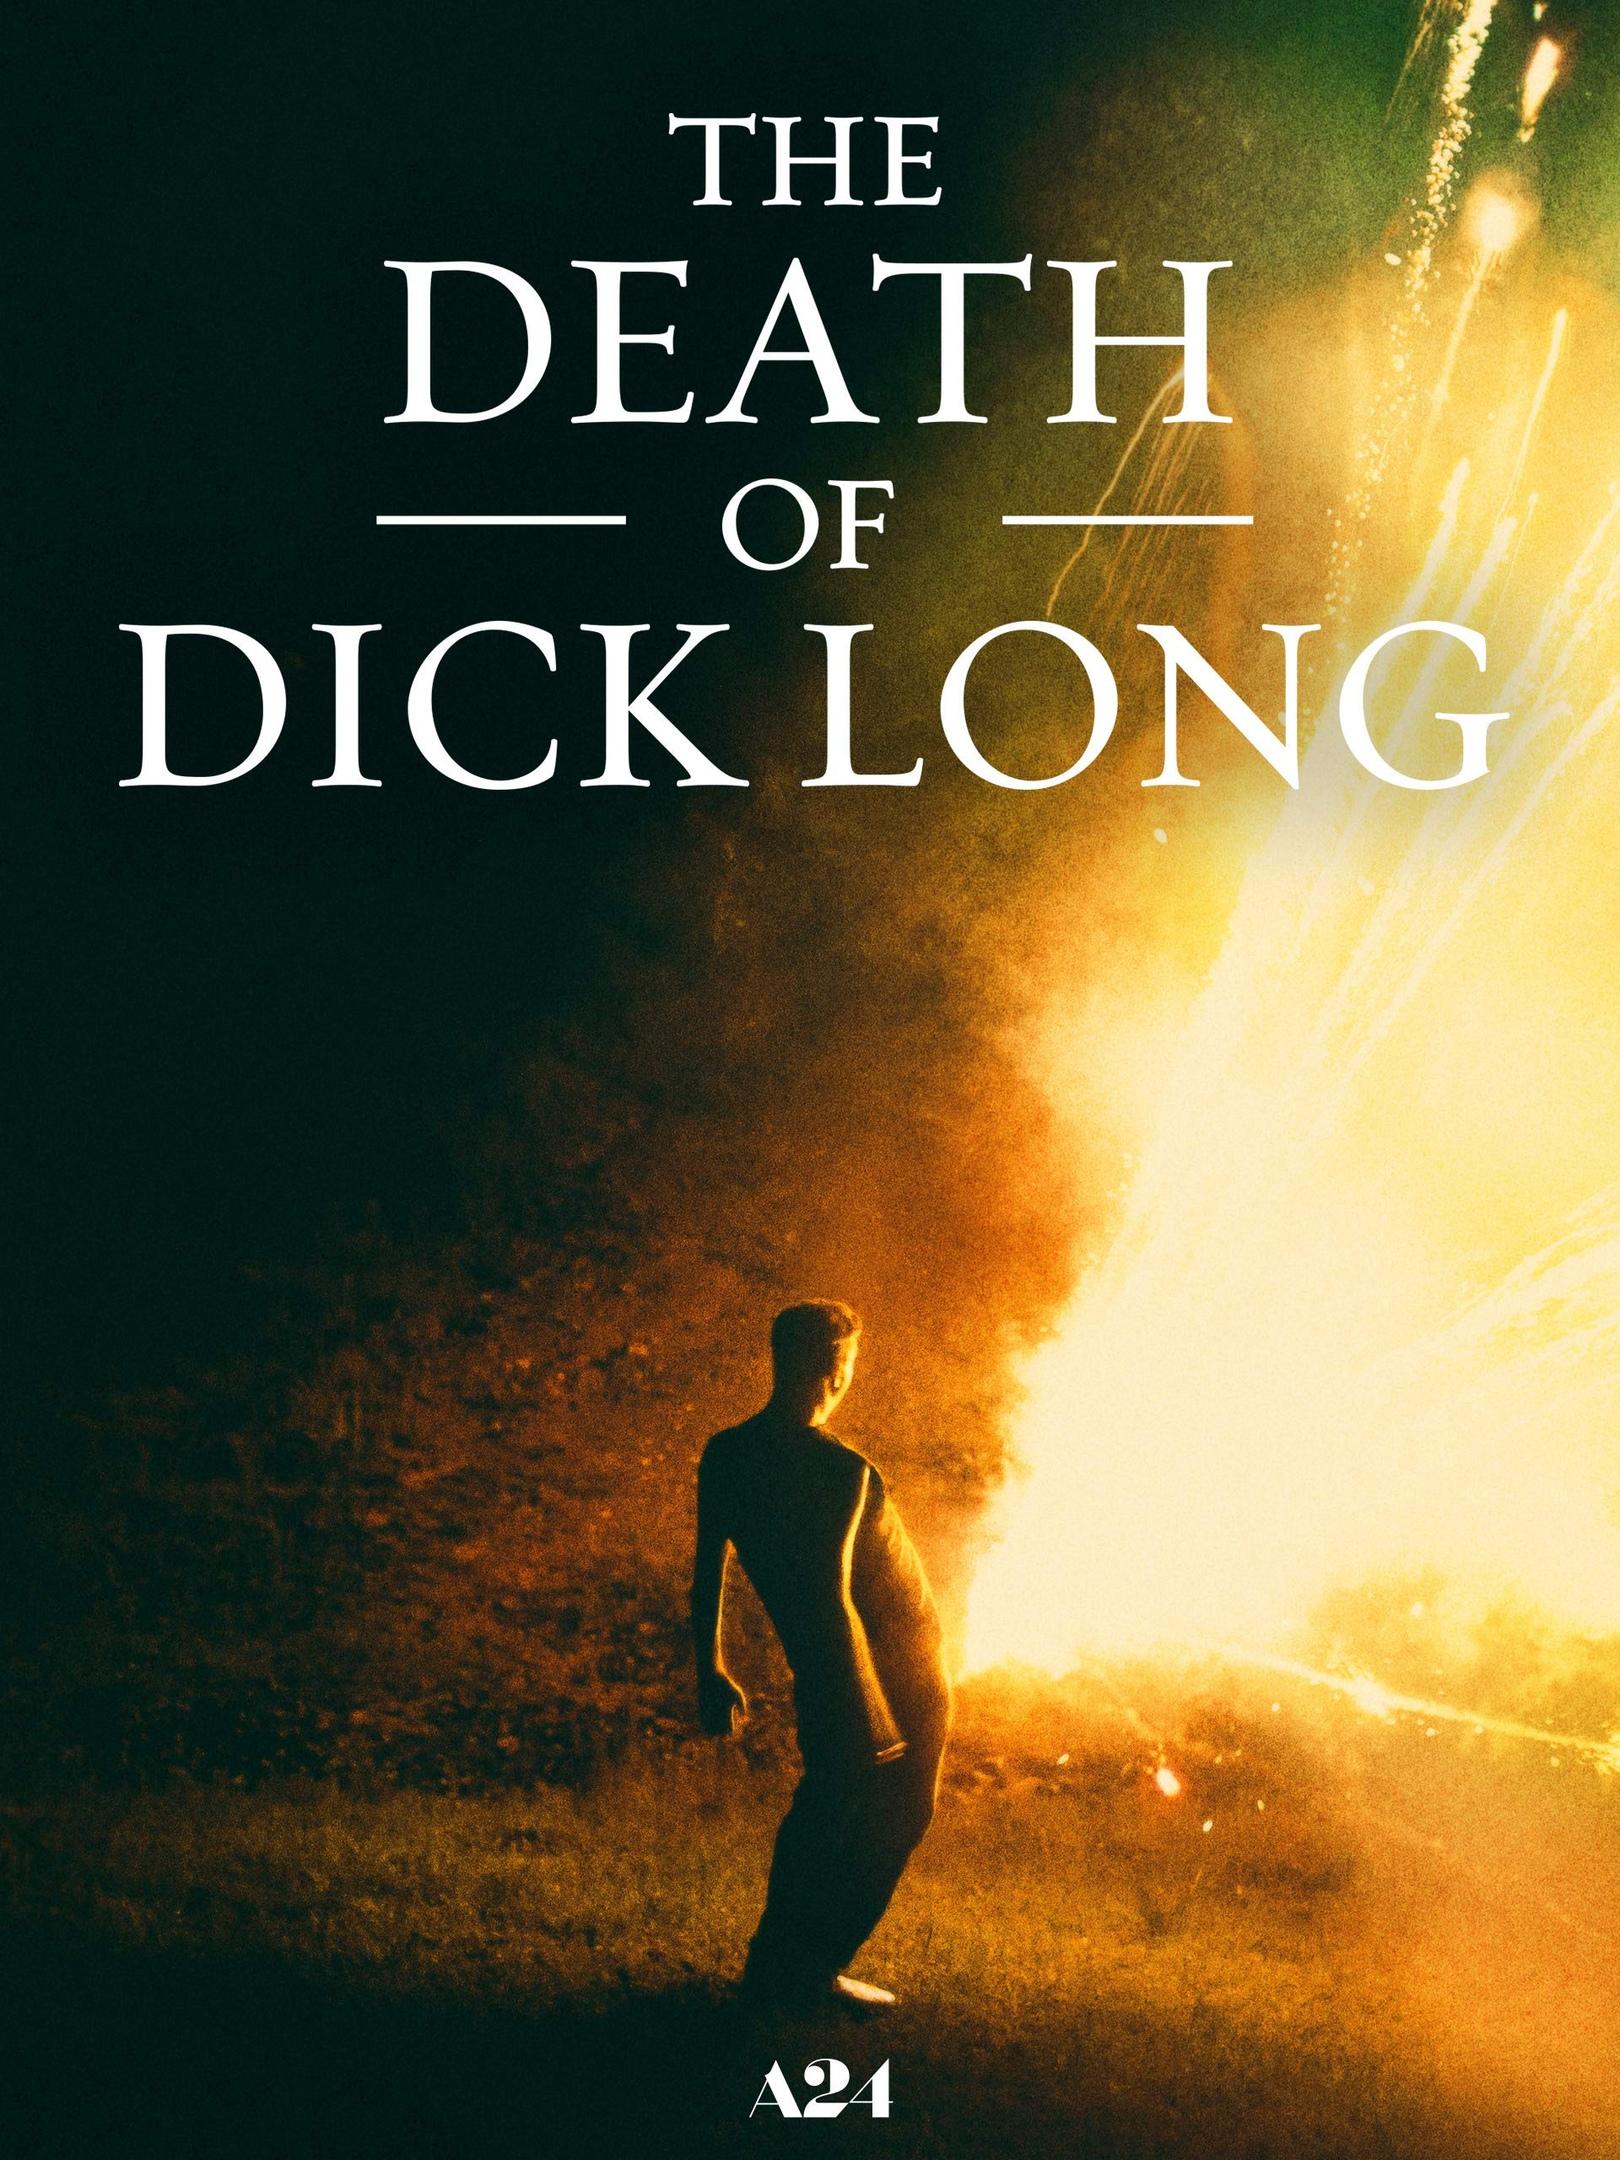 The death of dick long 2019